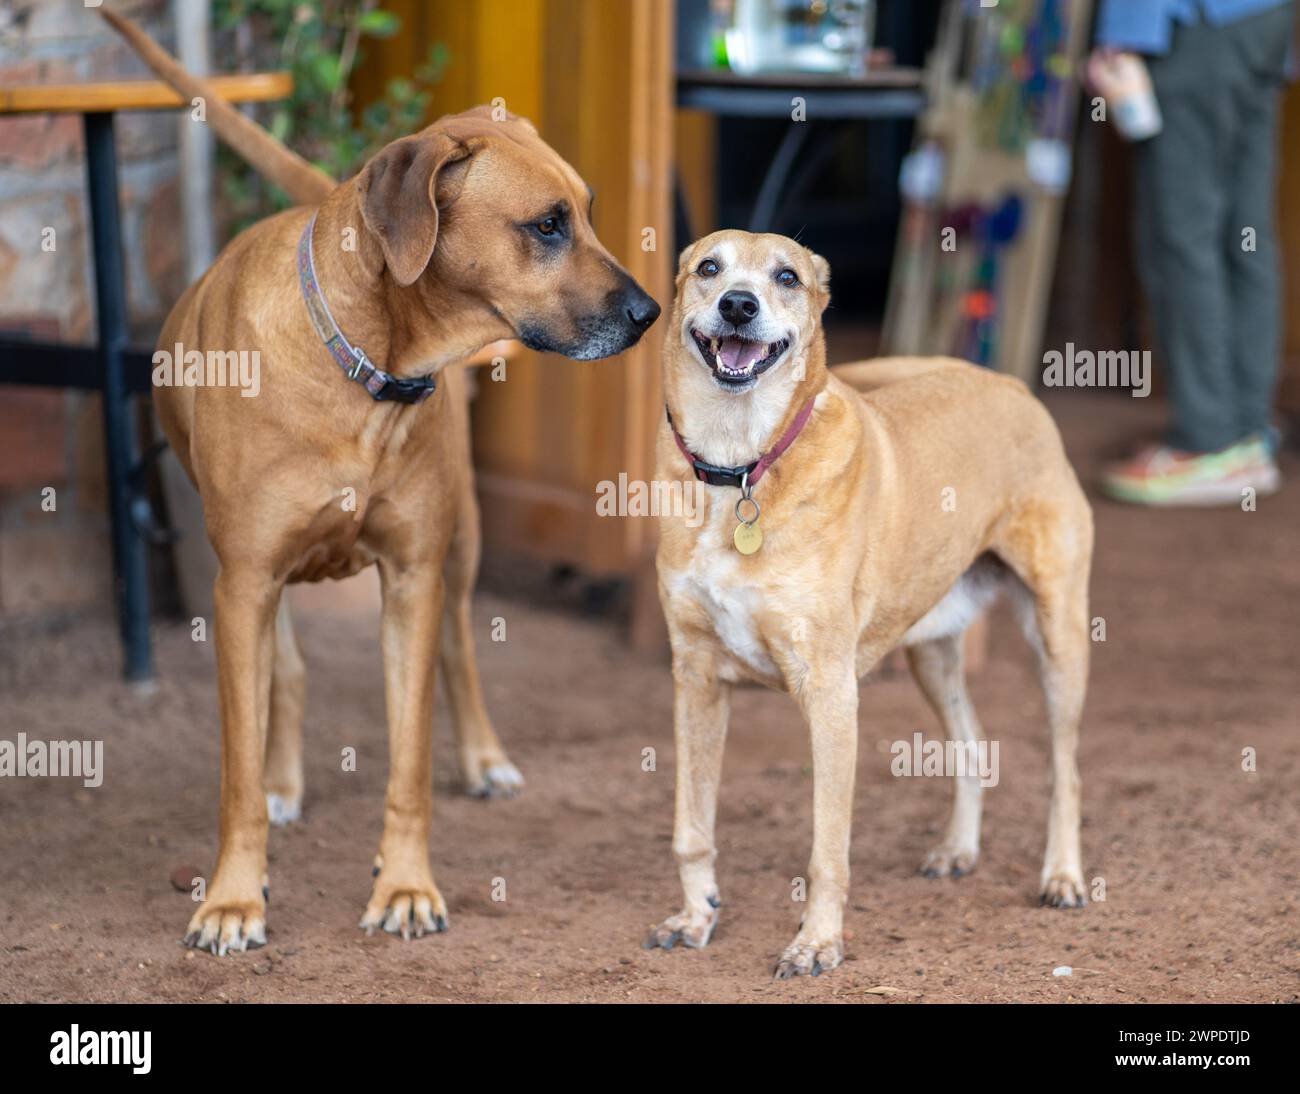 The two brown dogs standing side by side on the dusty ground Stock Photo